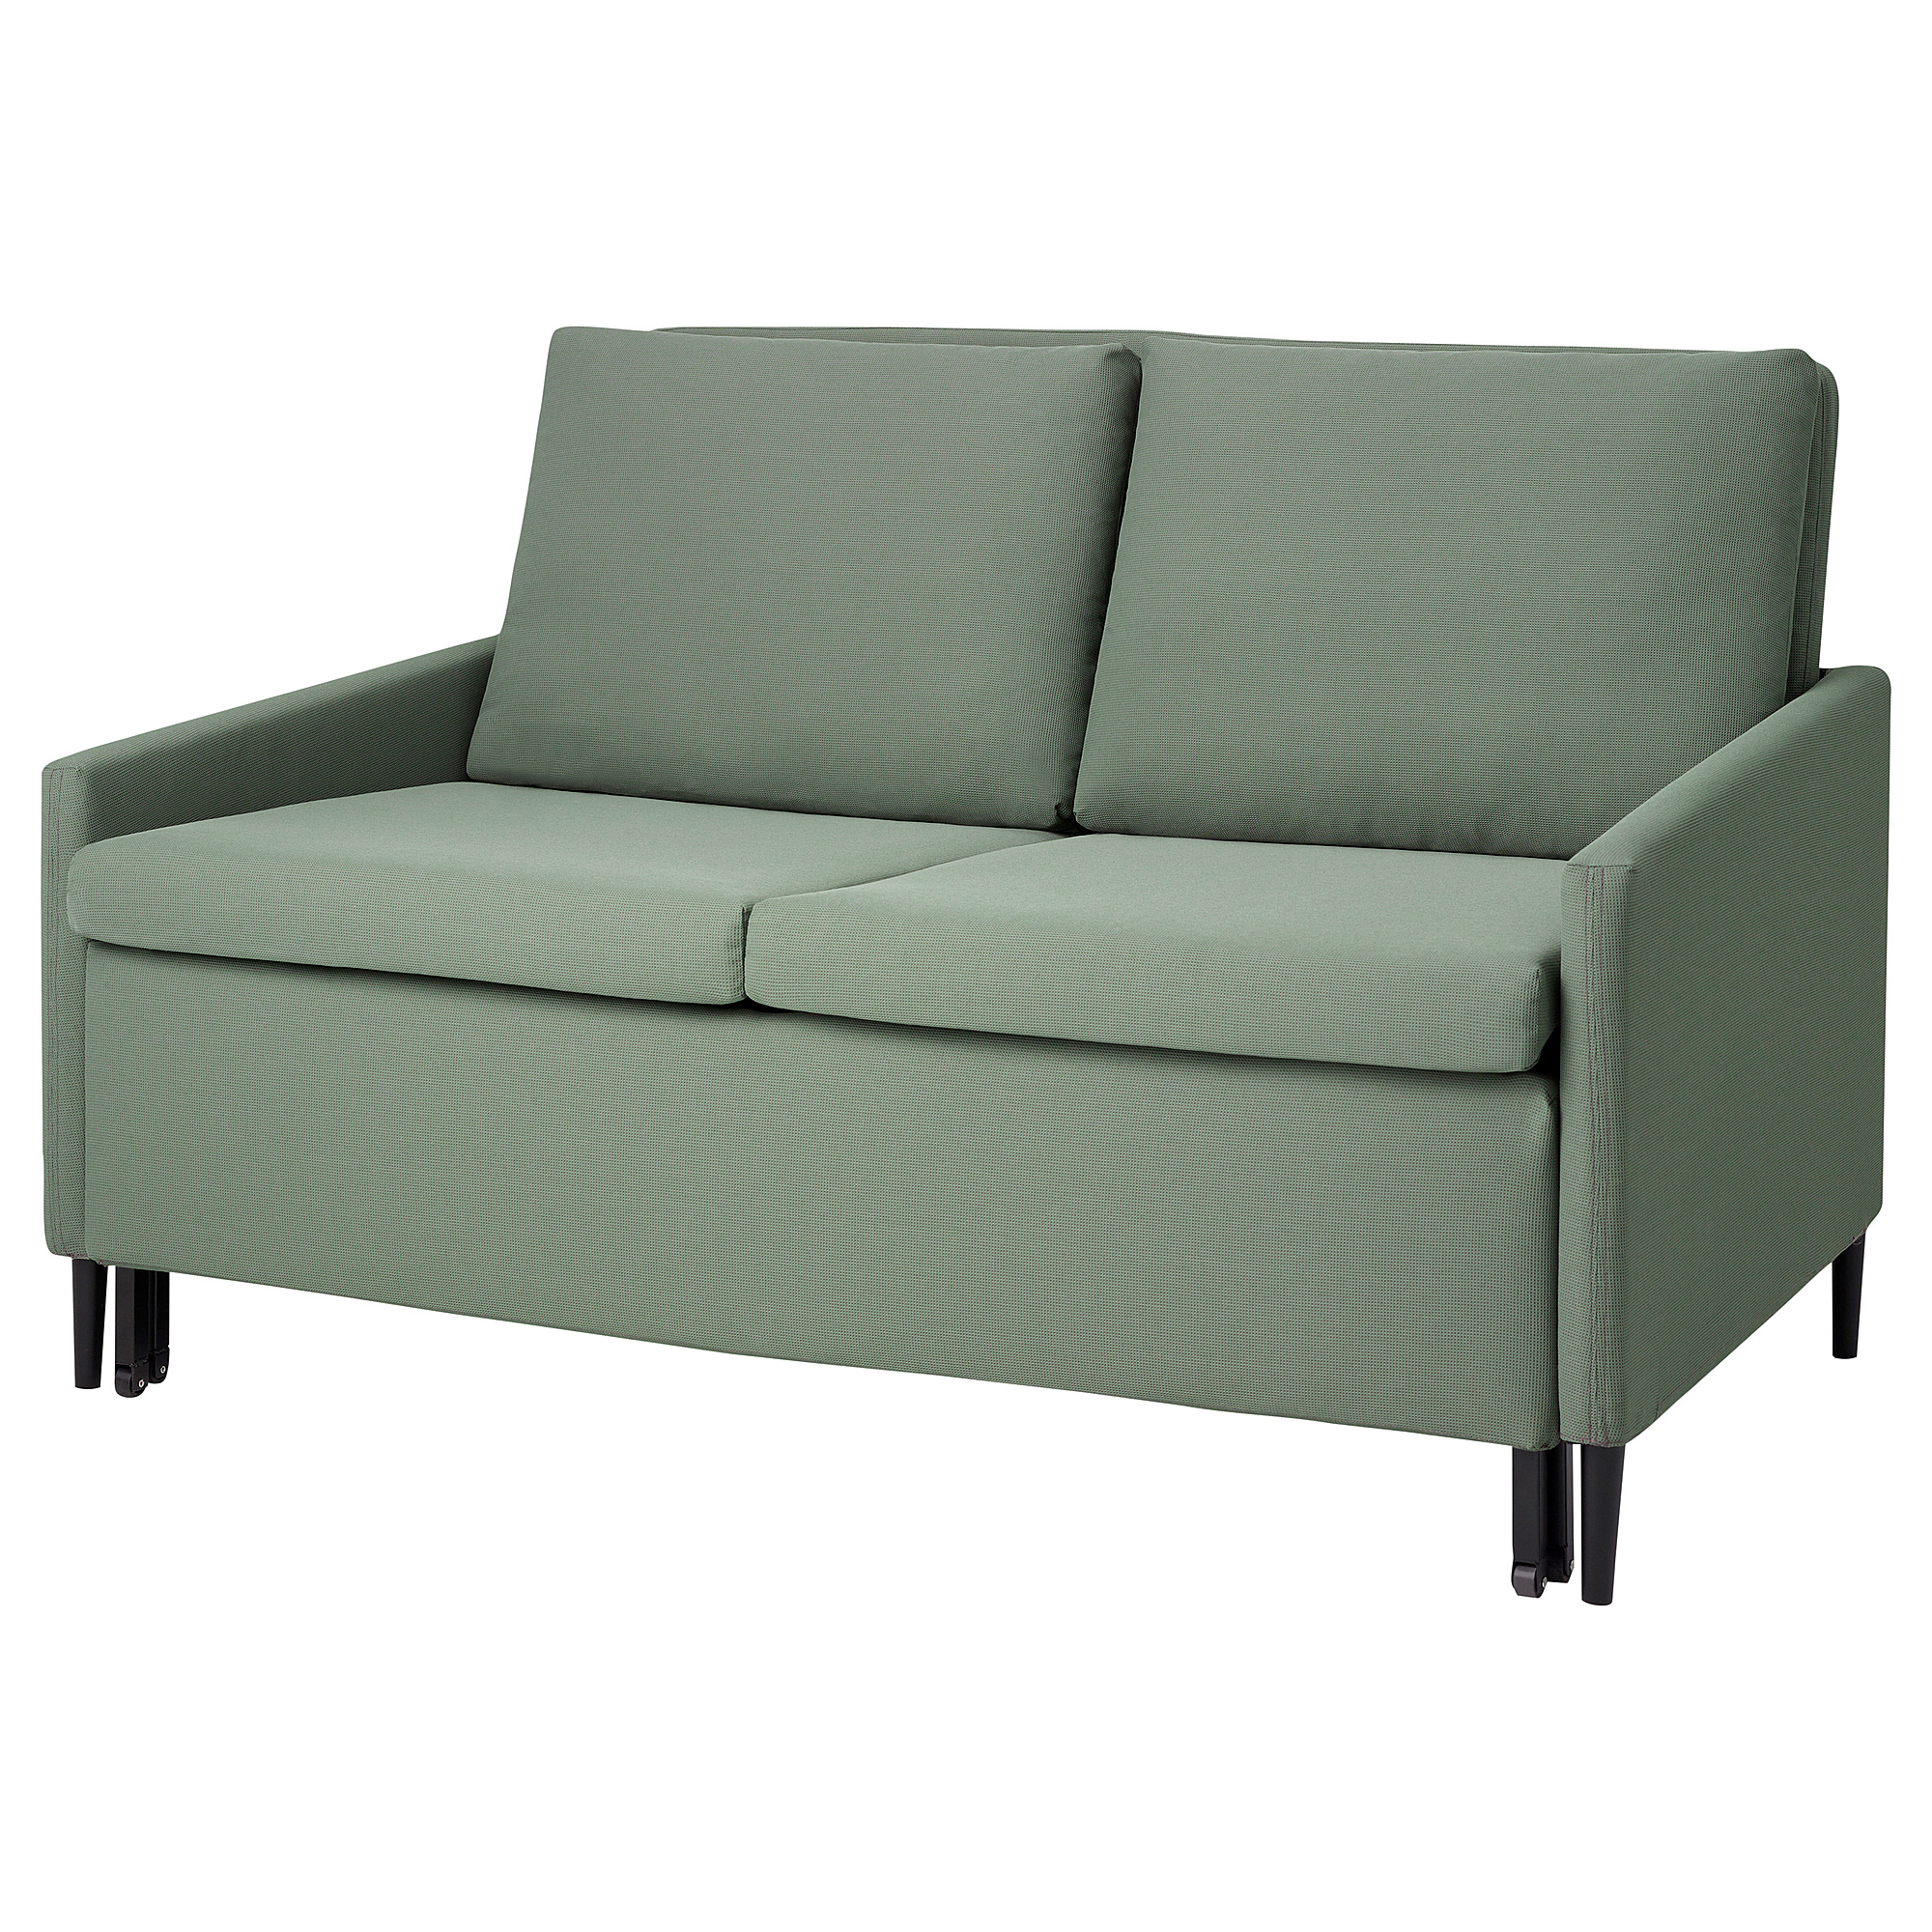 LINNEFORS 2-seat sofa-bed section